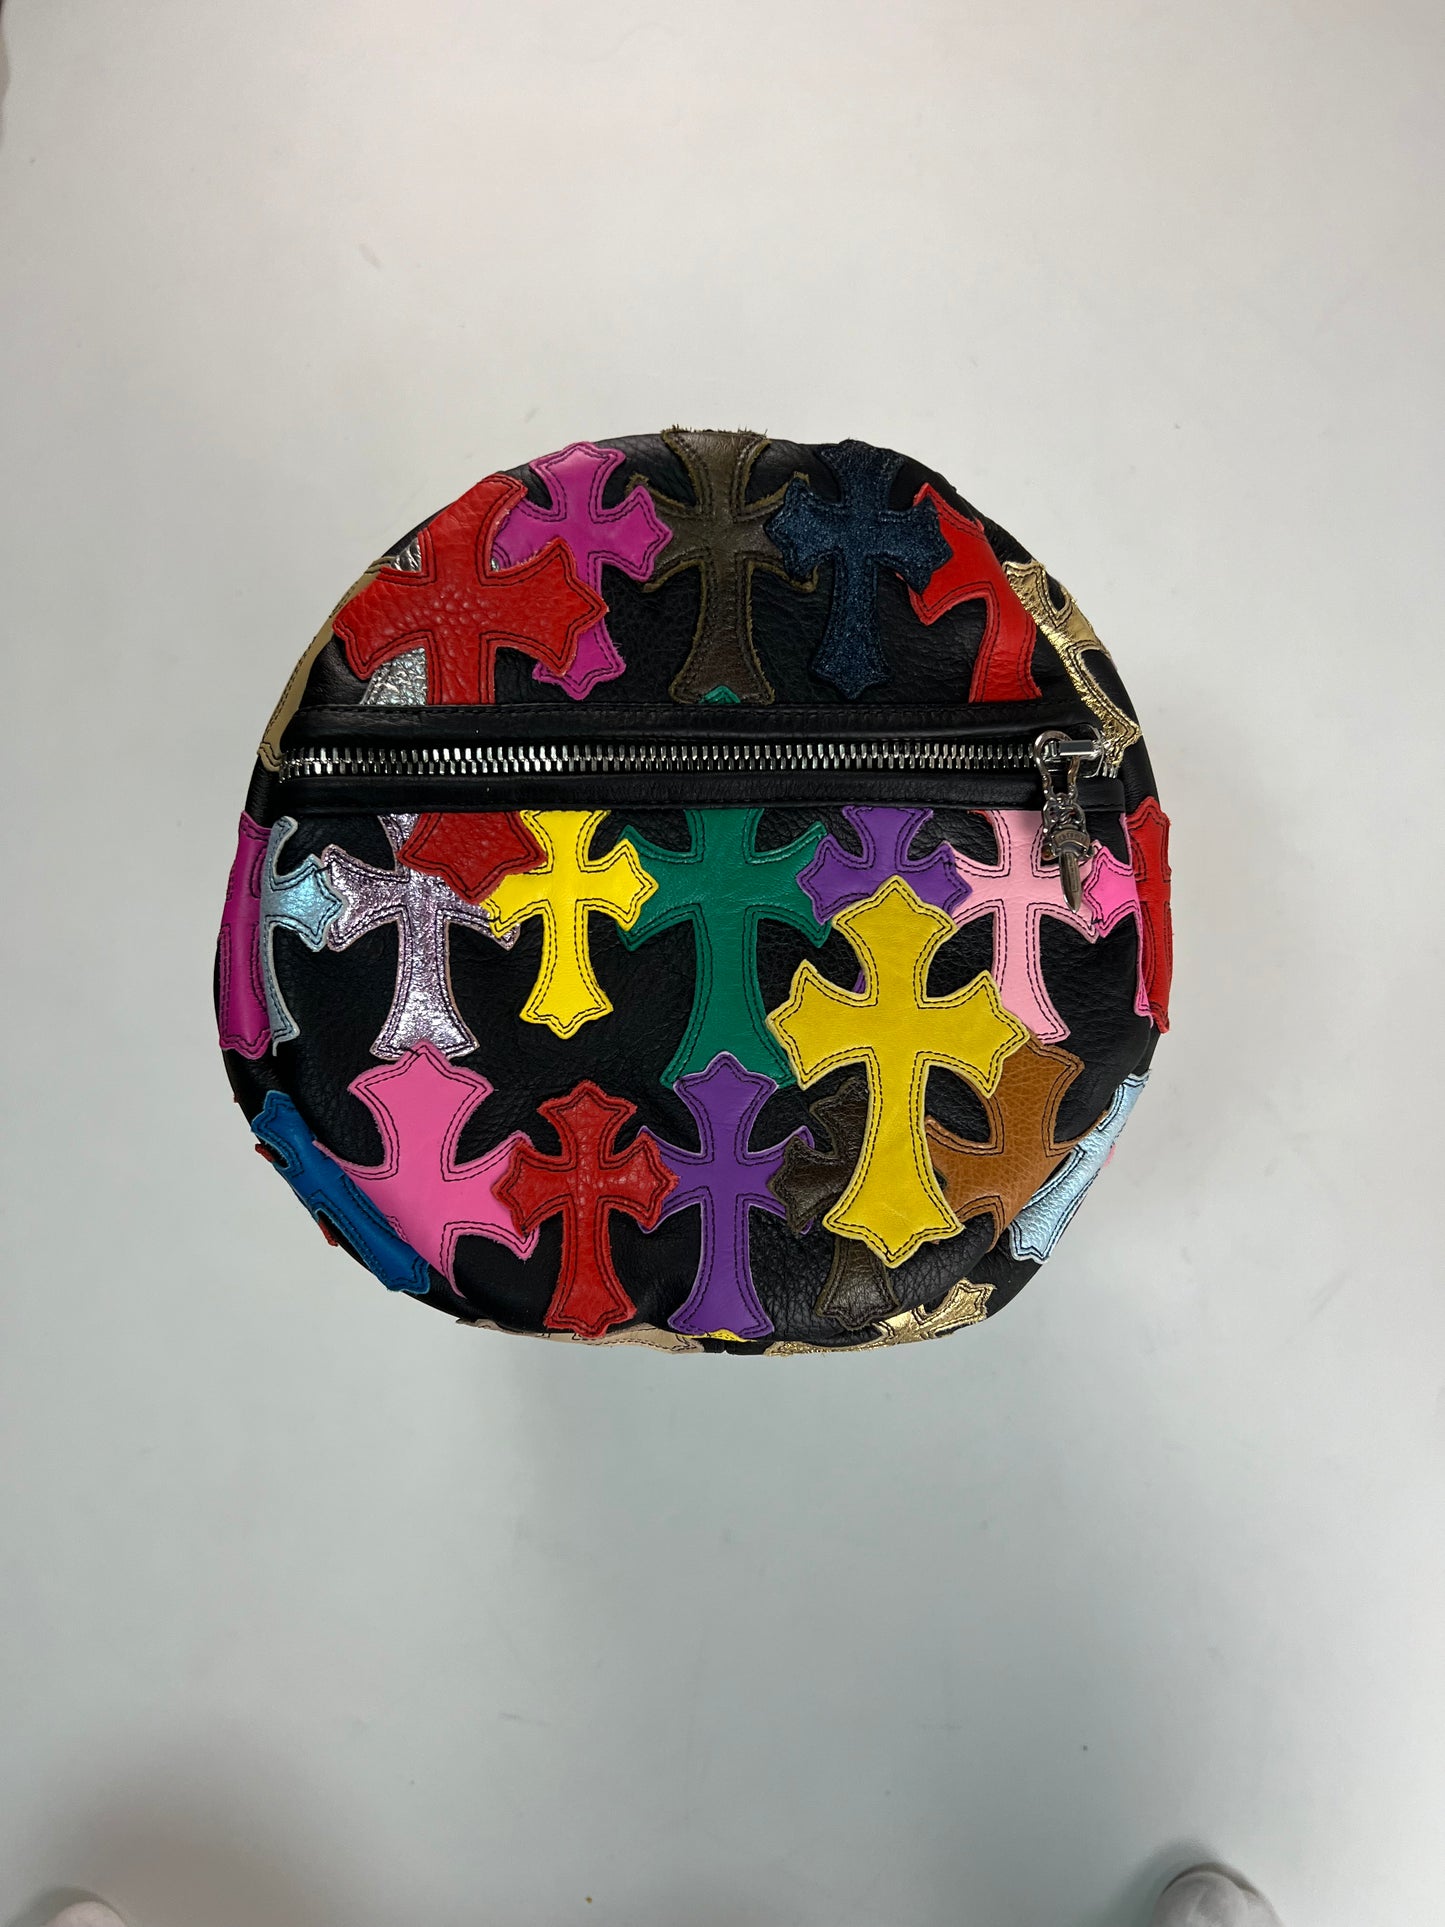 Chrome Hearts multi color patched 1of1 XL duffle Bag SZ:OS